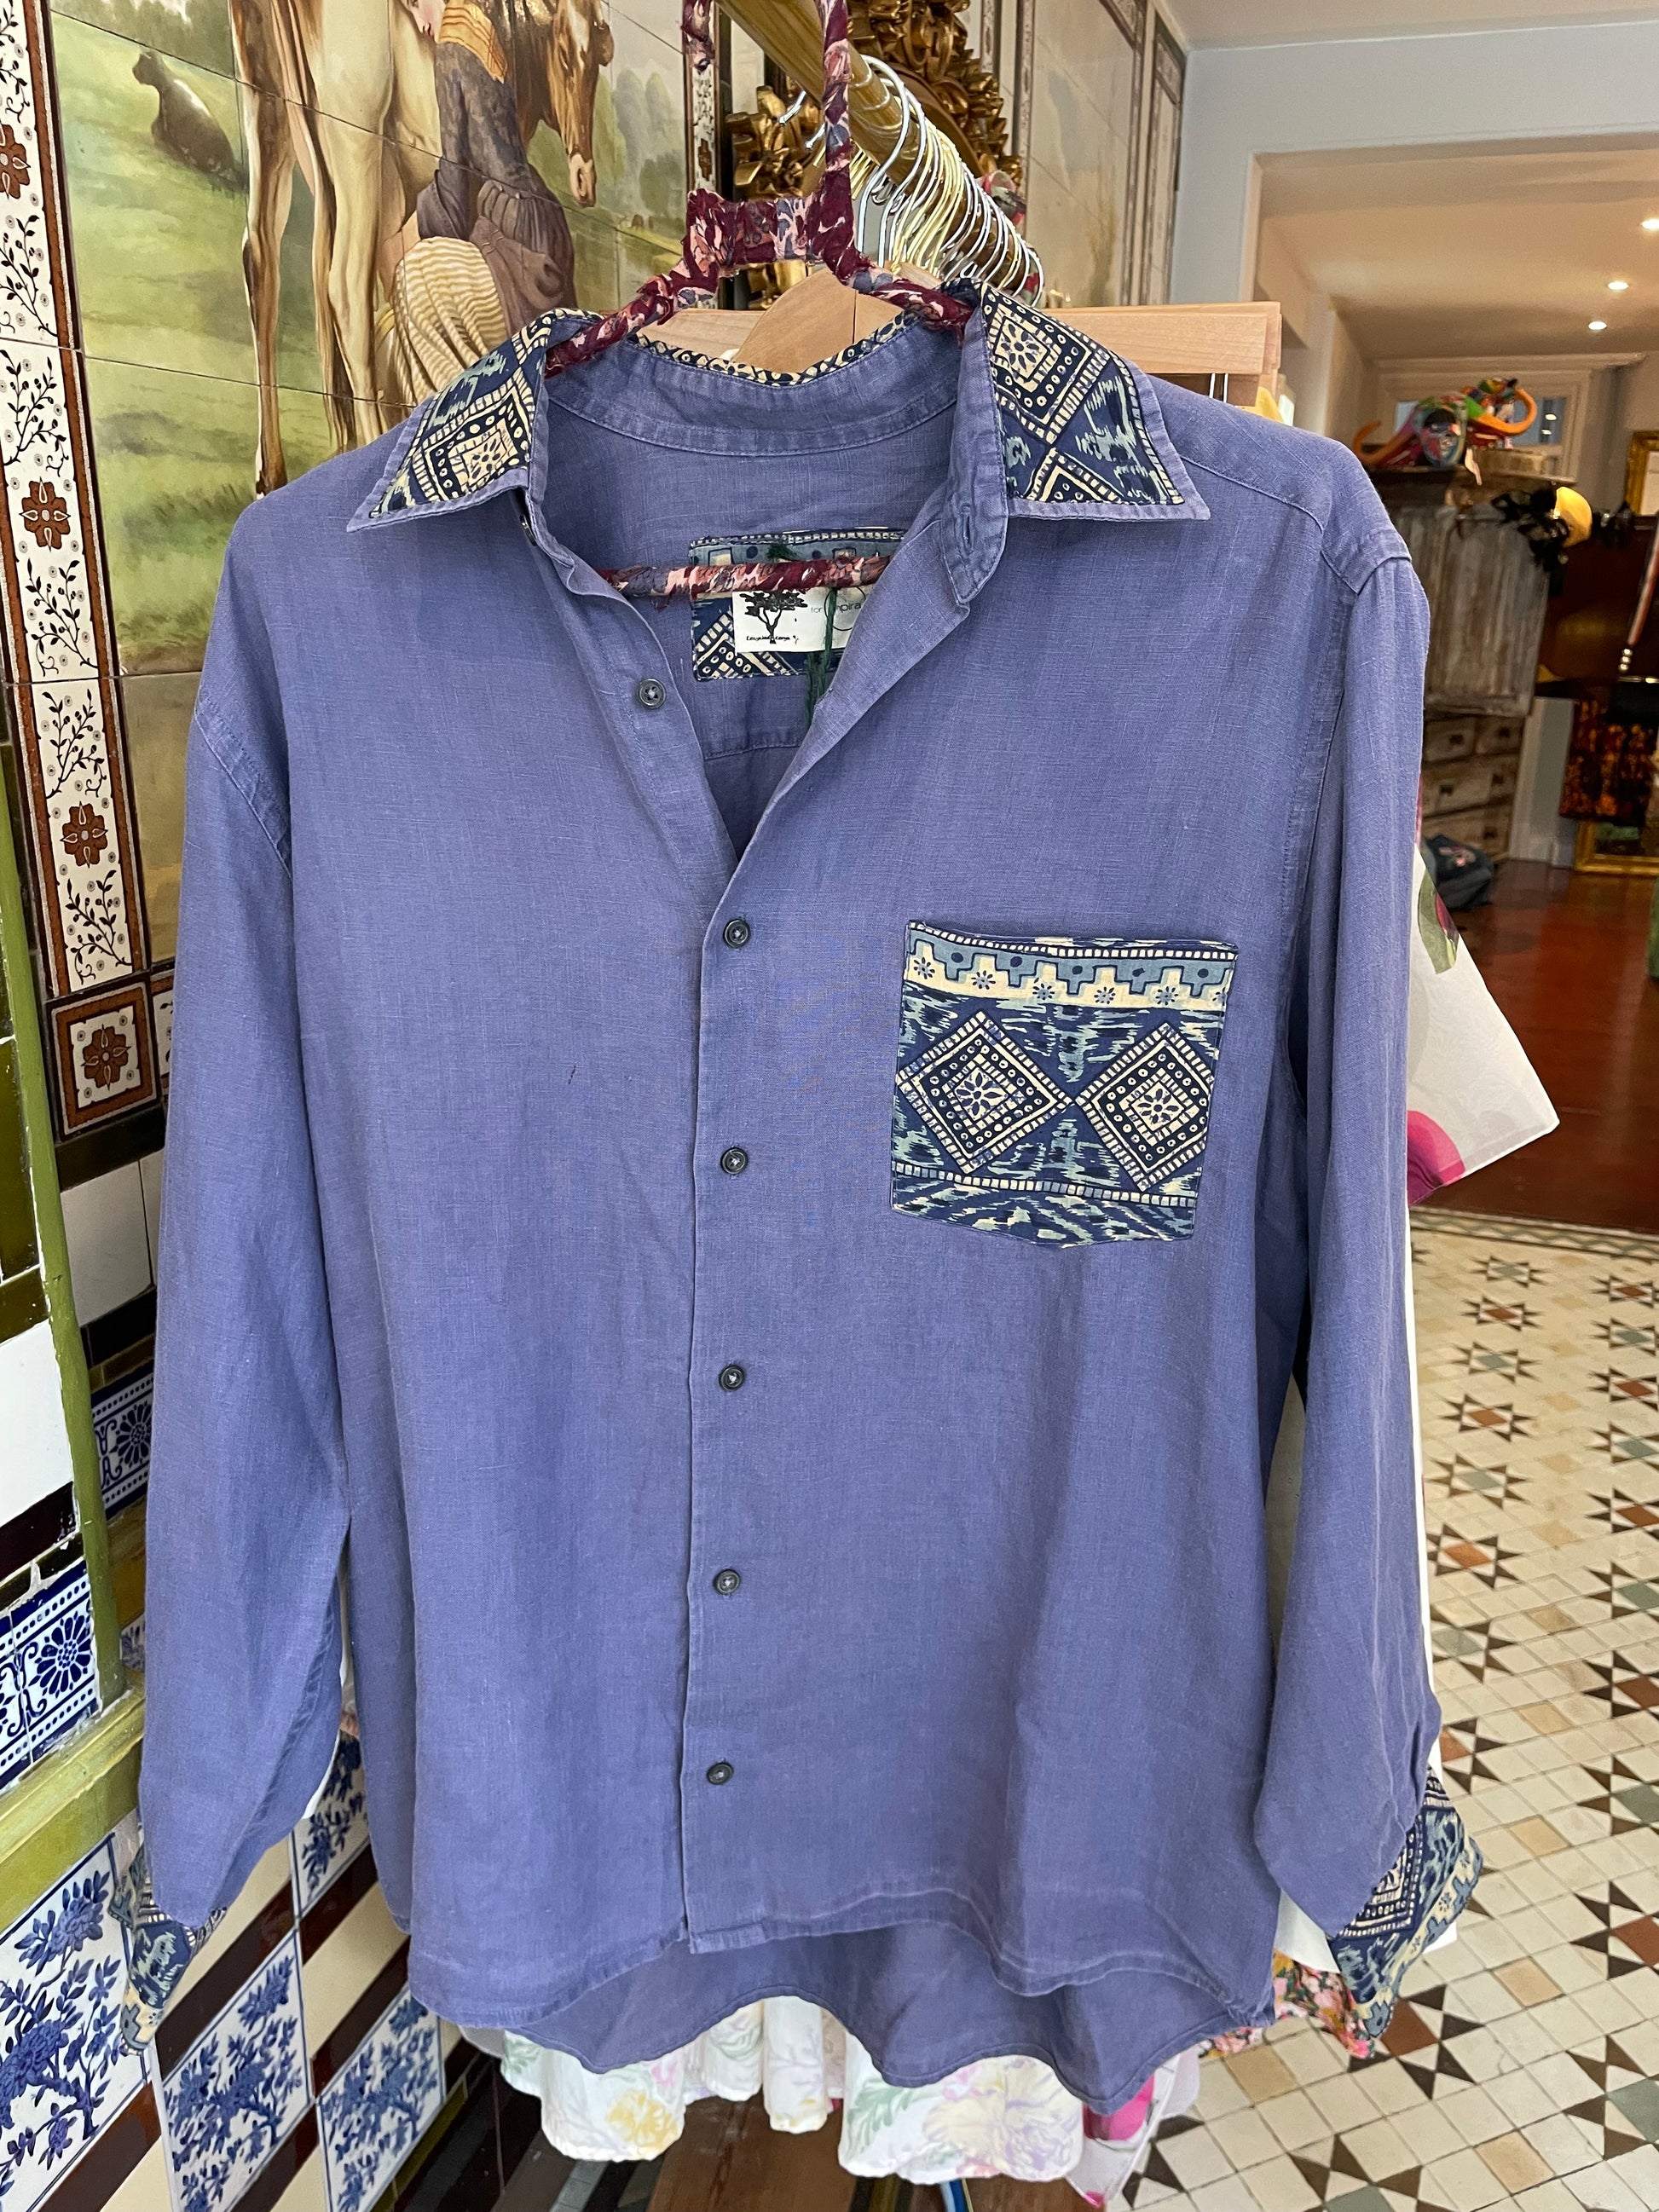 An Upcycled Shirt from mpira.